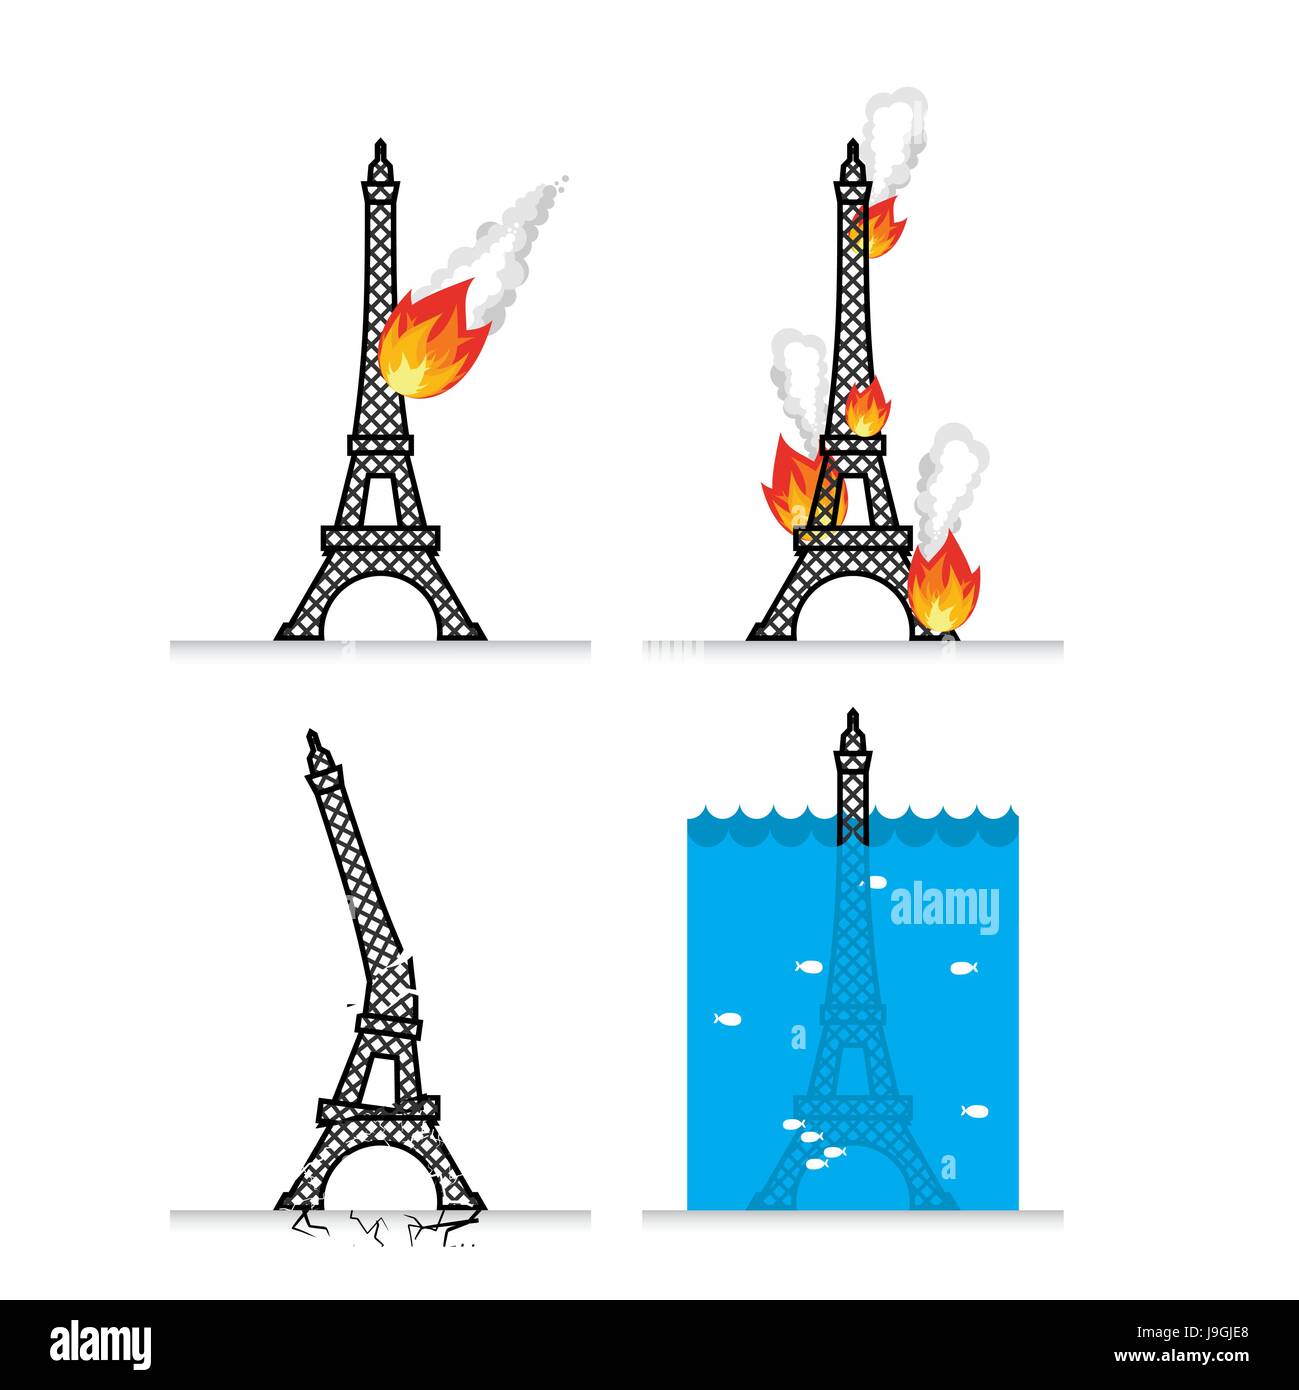 Destruction of Eiffel Tower in Paris. Meteorite flies symbol of France. Fire in sights. Lit Eiffel Tower. Natural disasters in France. Earthquake dest Stock Vector